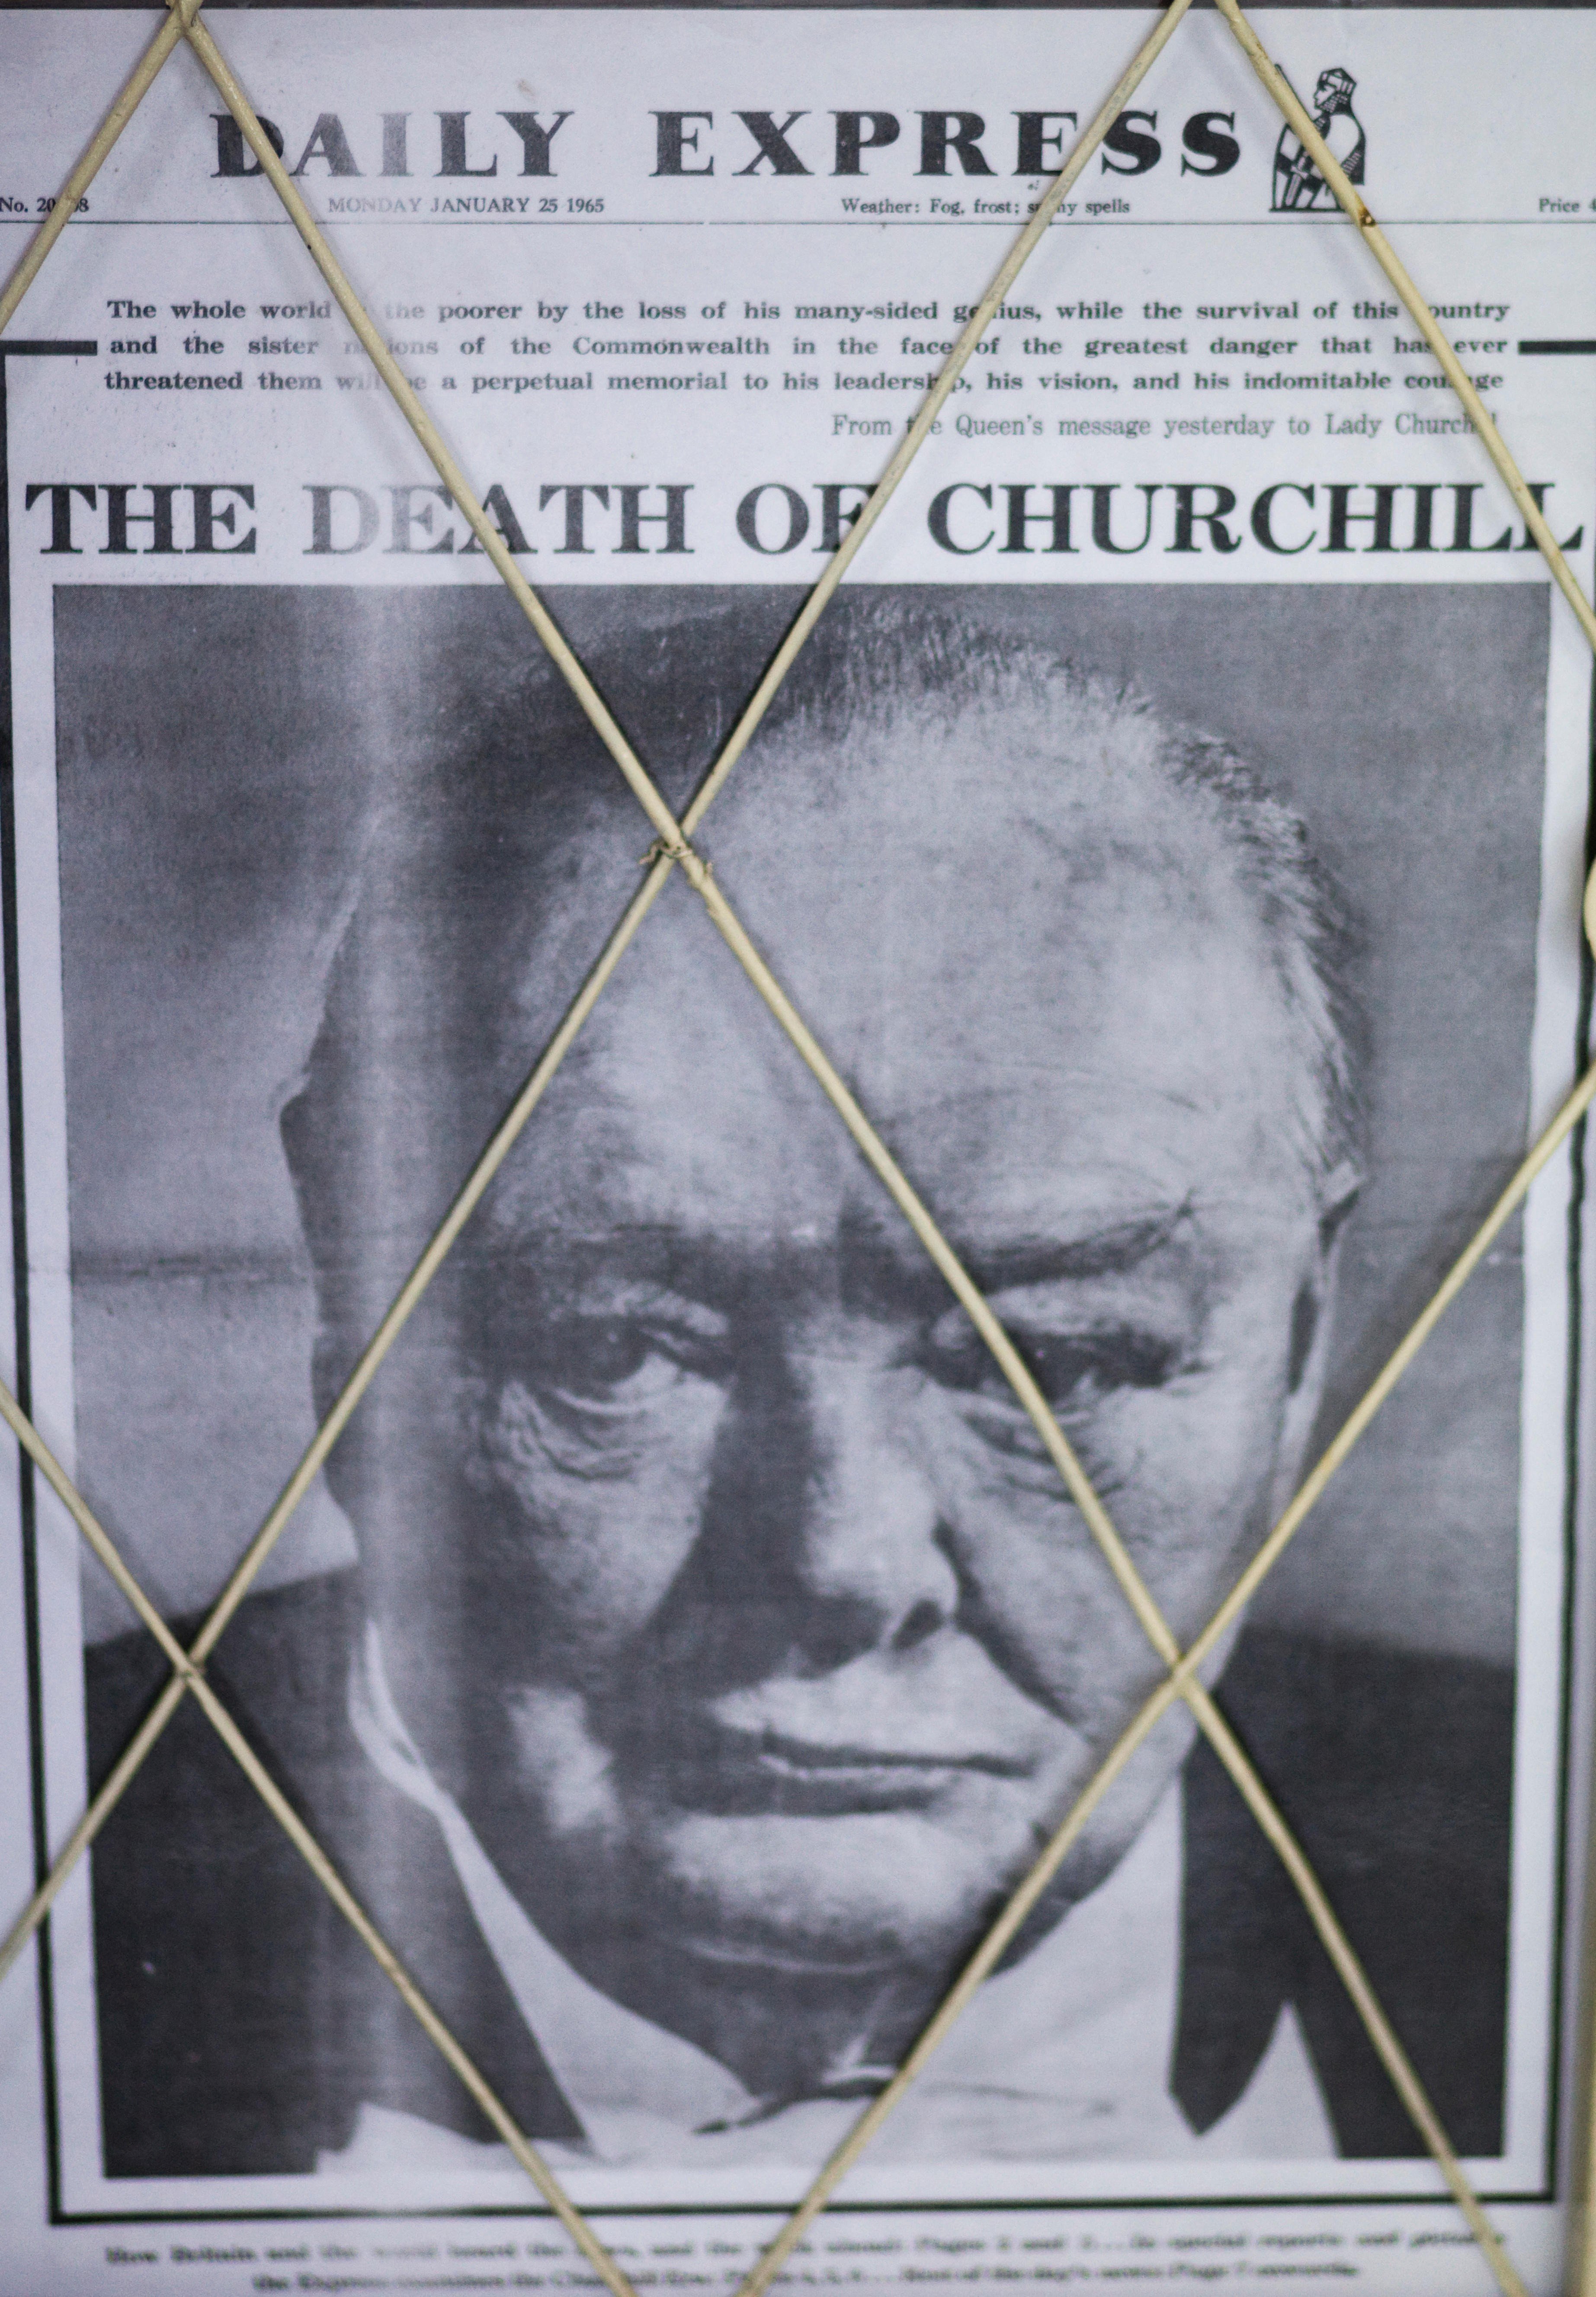 Front page of the Daily Express reporting the death of Winston Churchill. Photo: Alamy